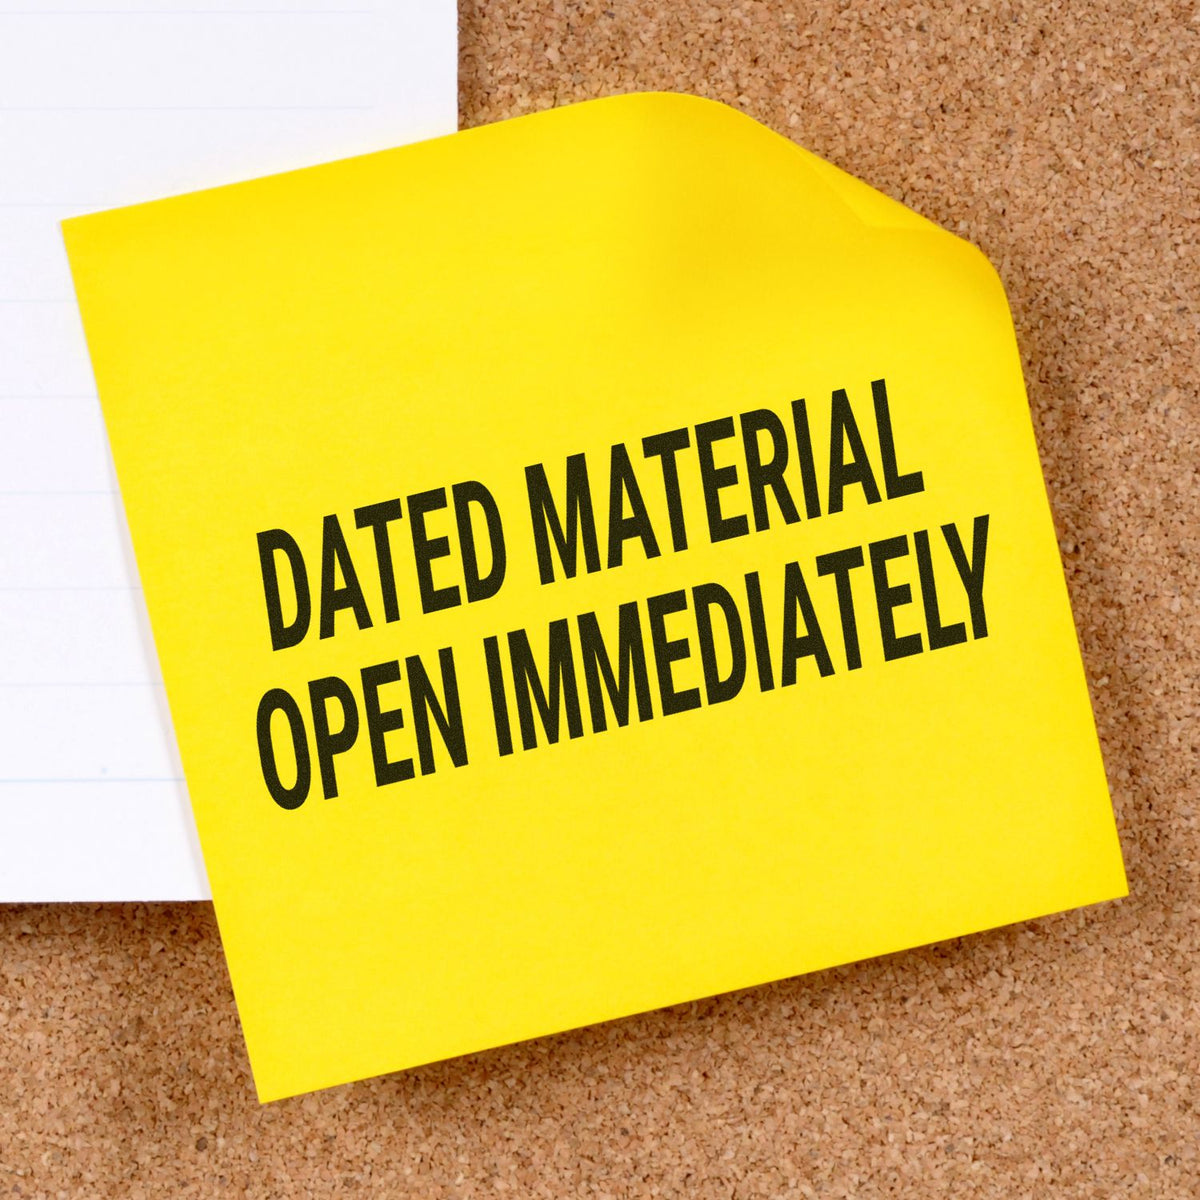 Dated Material Open Immediately Rubber Stamp Lifestyle Photo